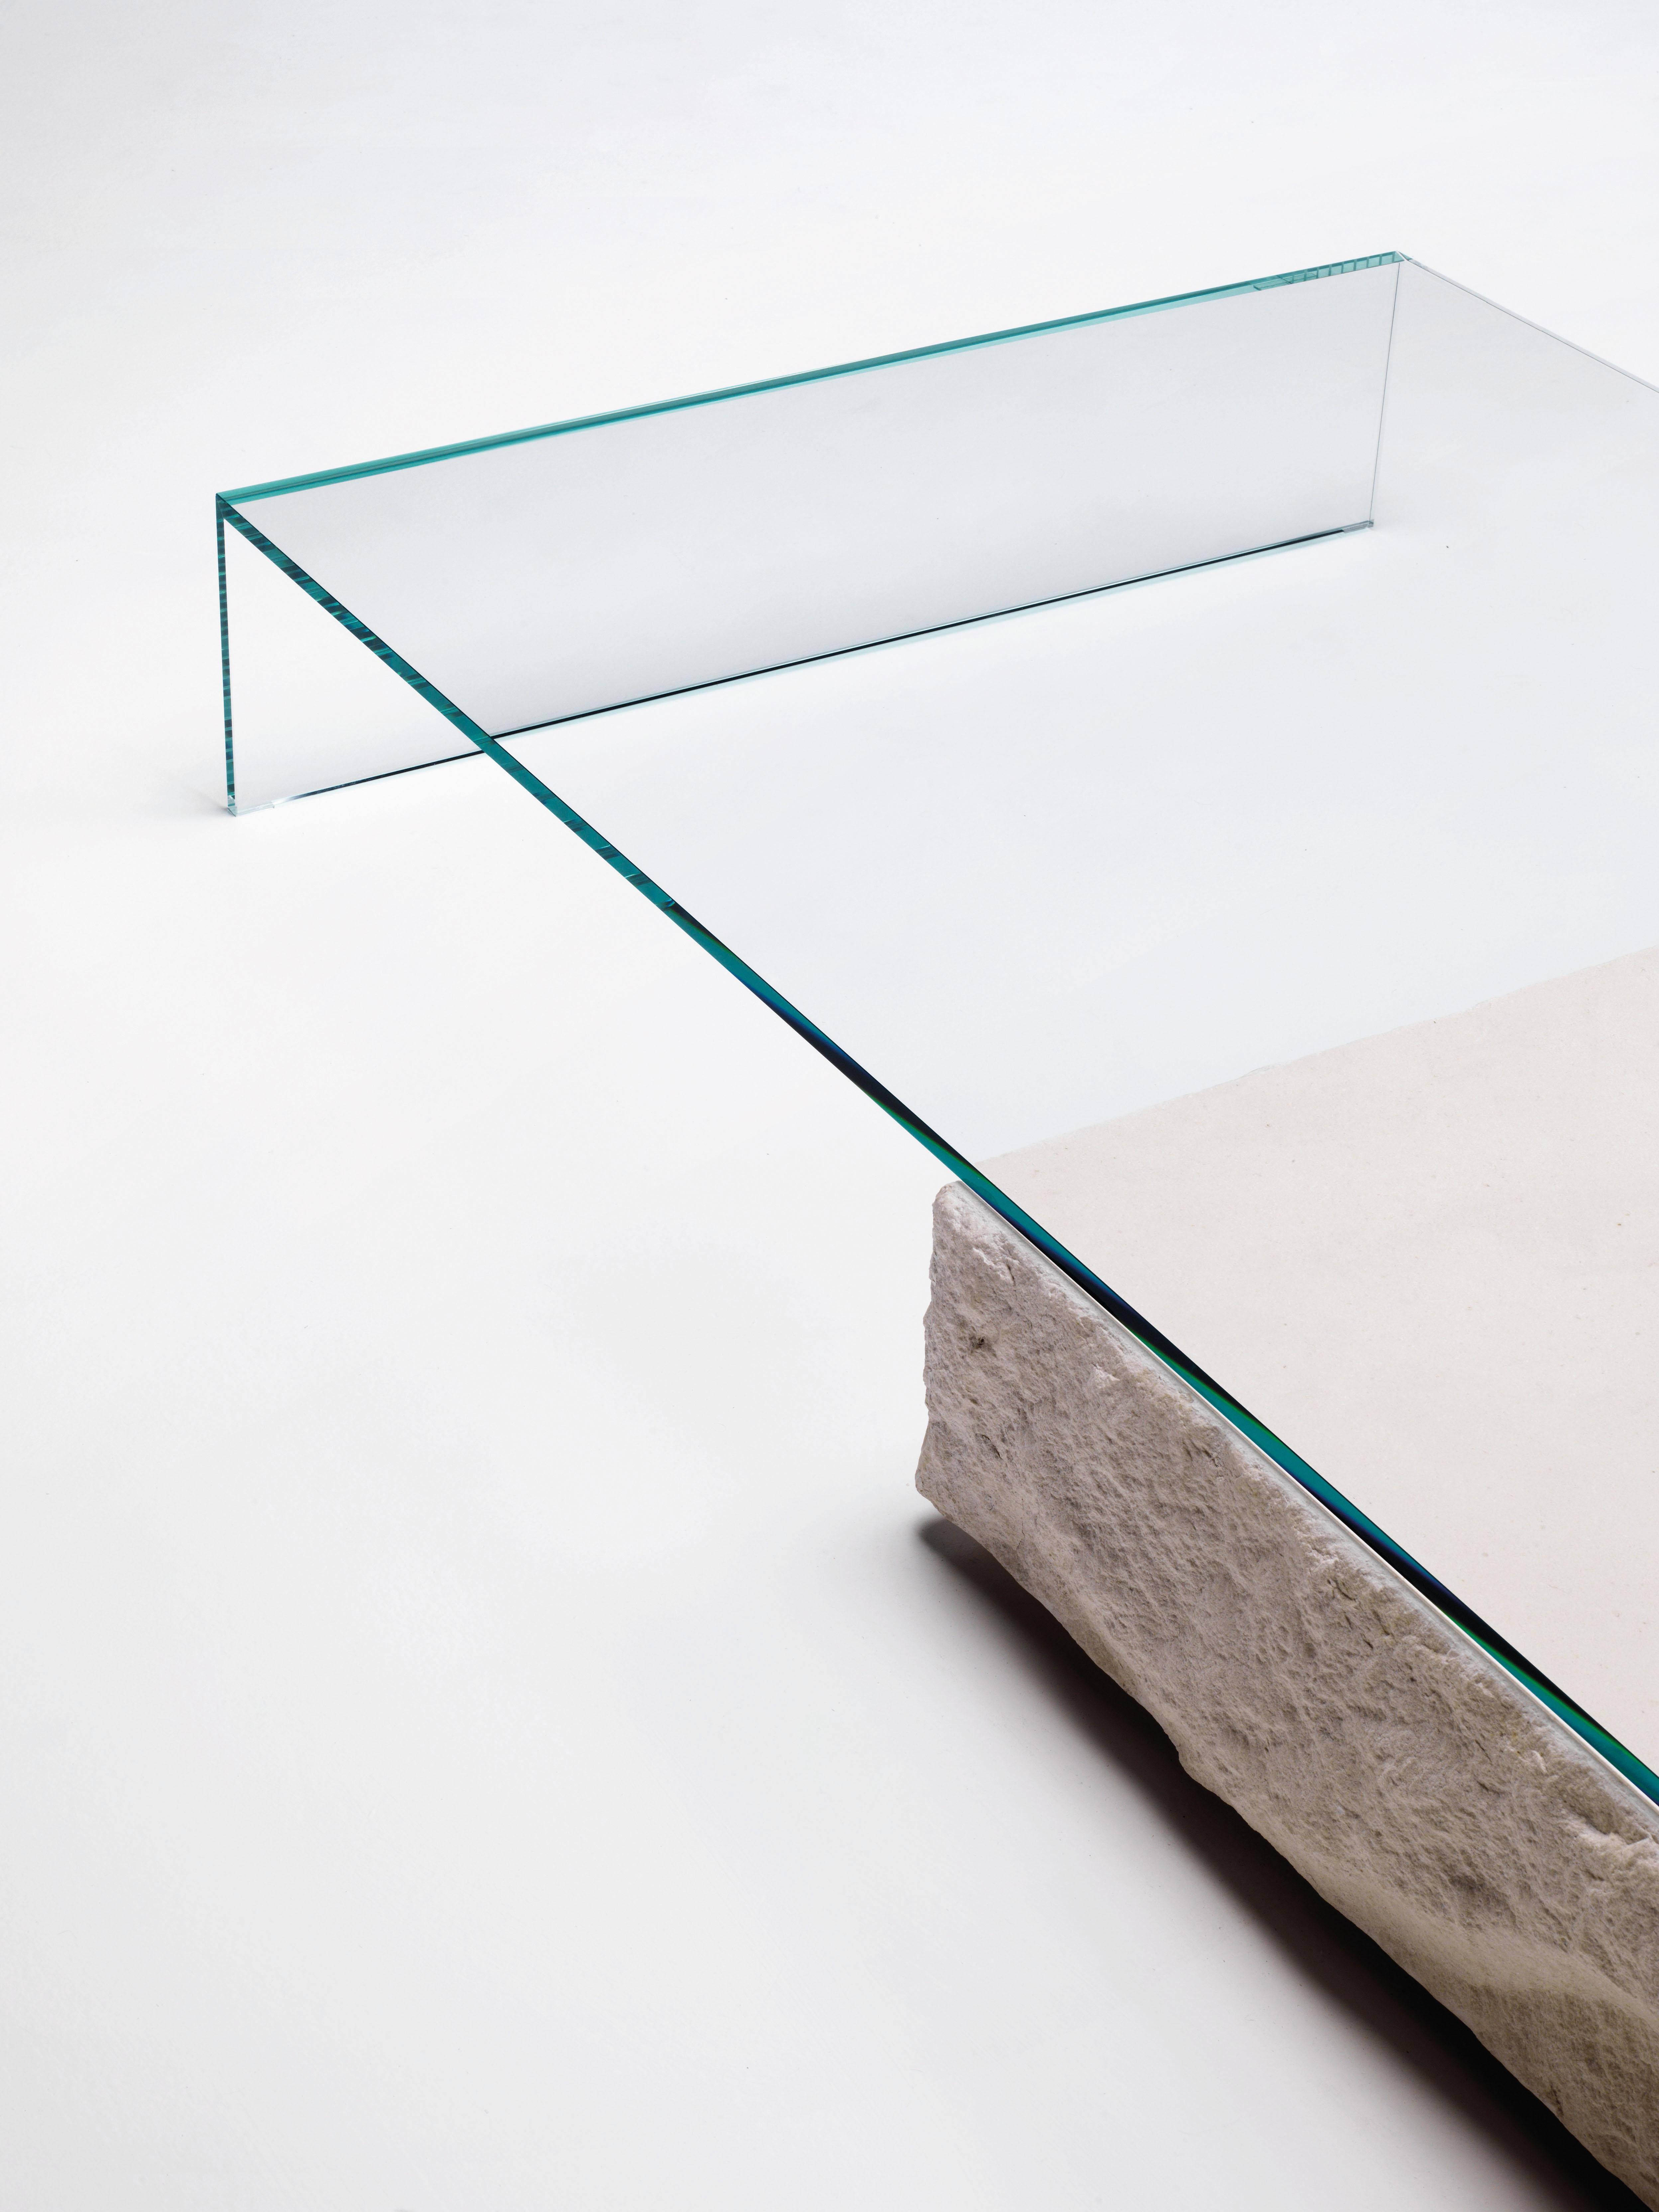 Terraliquida low table is shown here in the transparent extralight glasss. Low table composed of a parallelepiped Limestone stone with a monolithic appearance and an element in tempered 15 mm. thick glued 45° transparent extralight glass that rests